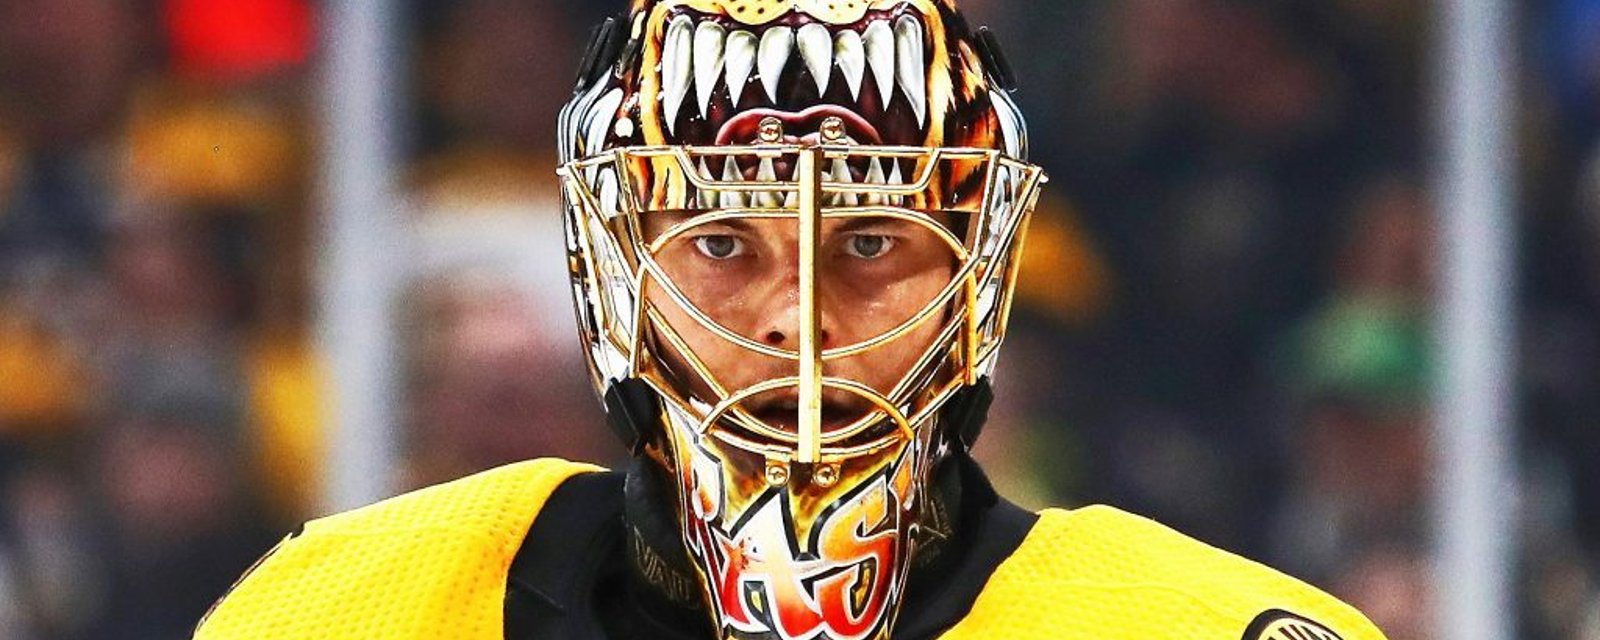 Bruins’ Cassidy reveals team is ready to move on with Rask